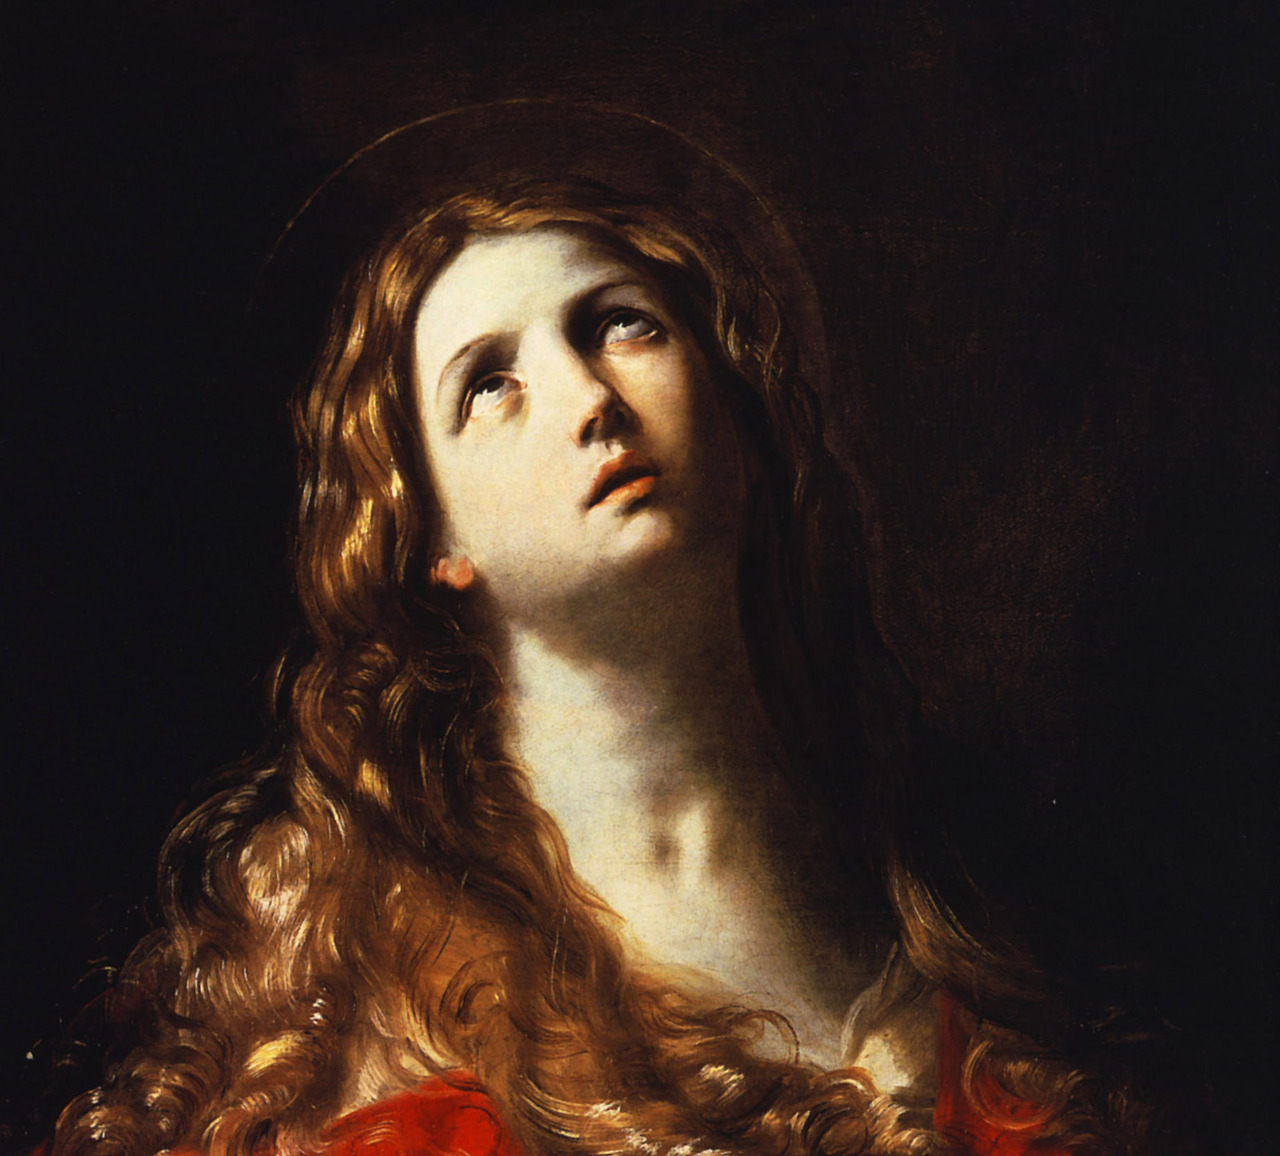 therepublicofletters: Details of Saint Mary Magadalene (1635) and Saint Cecilia (1606)